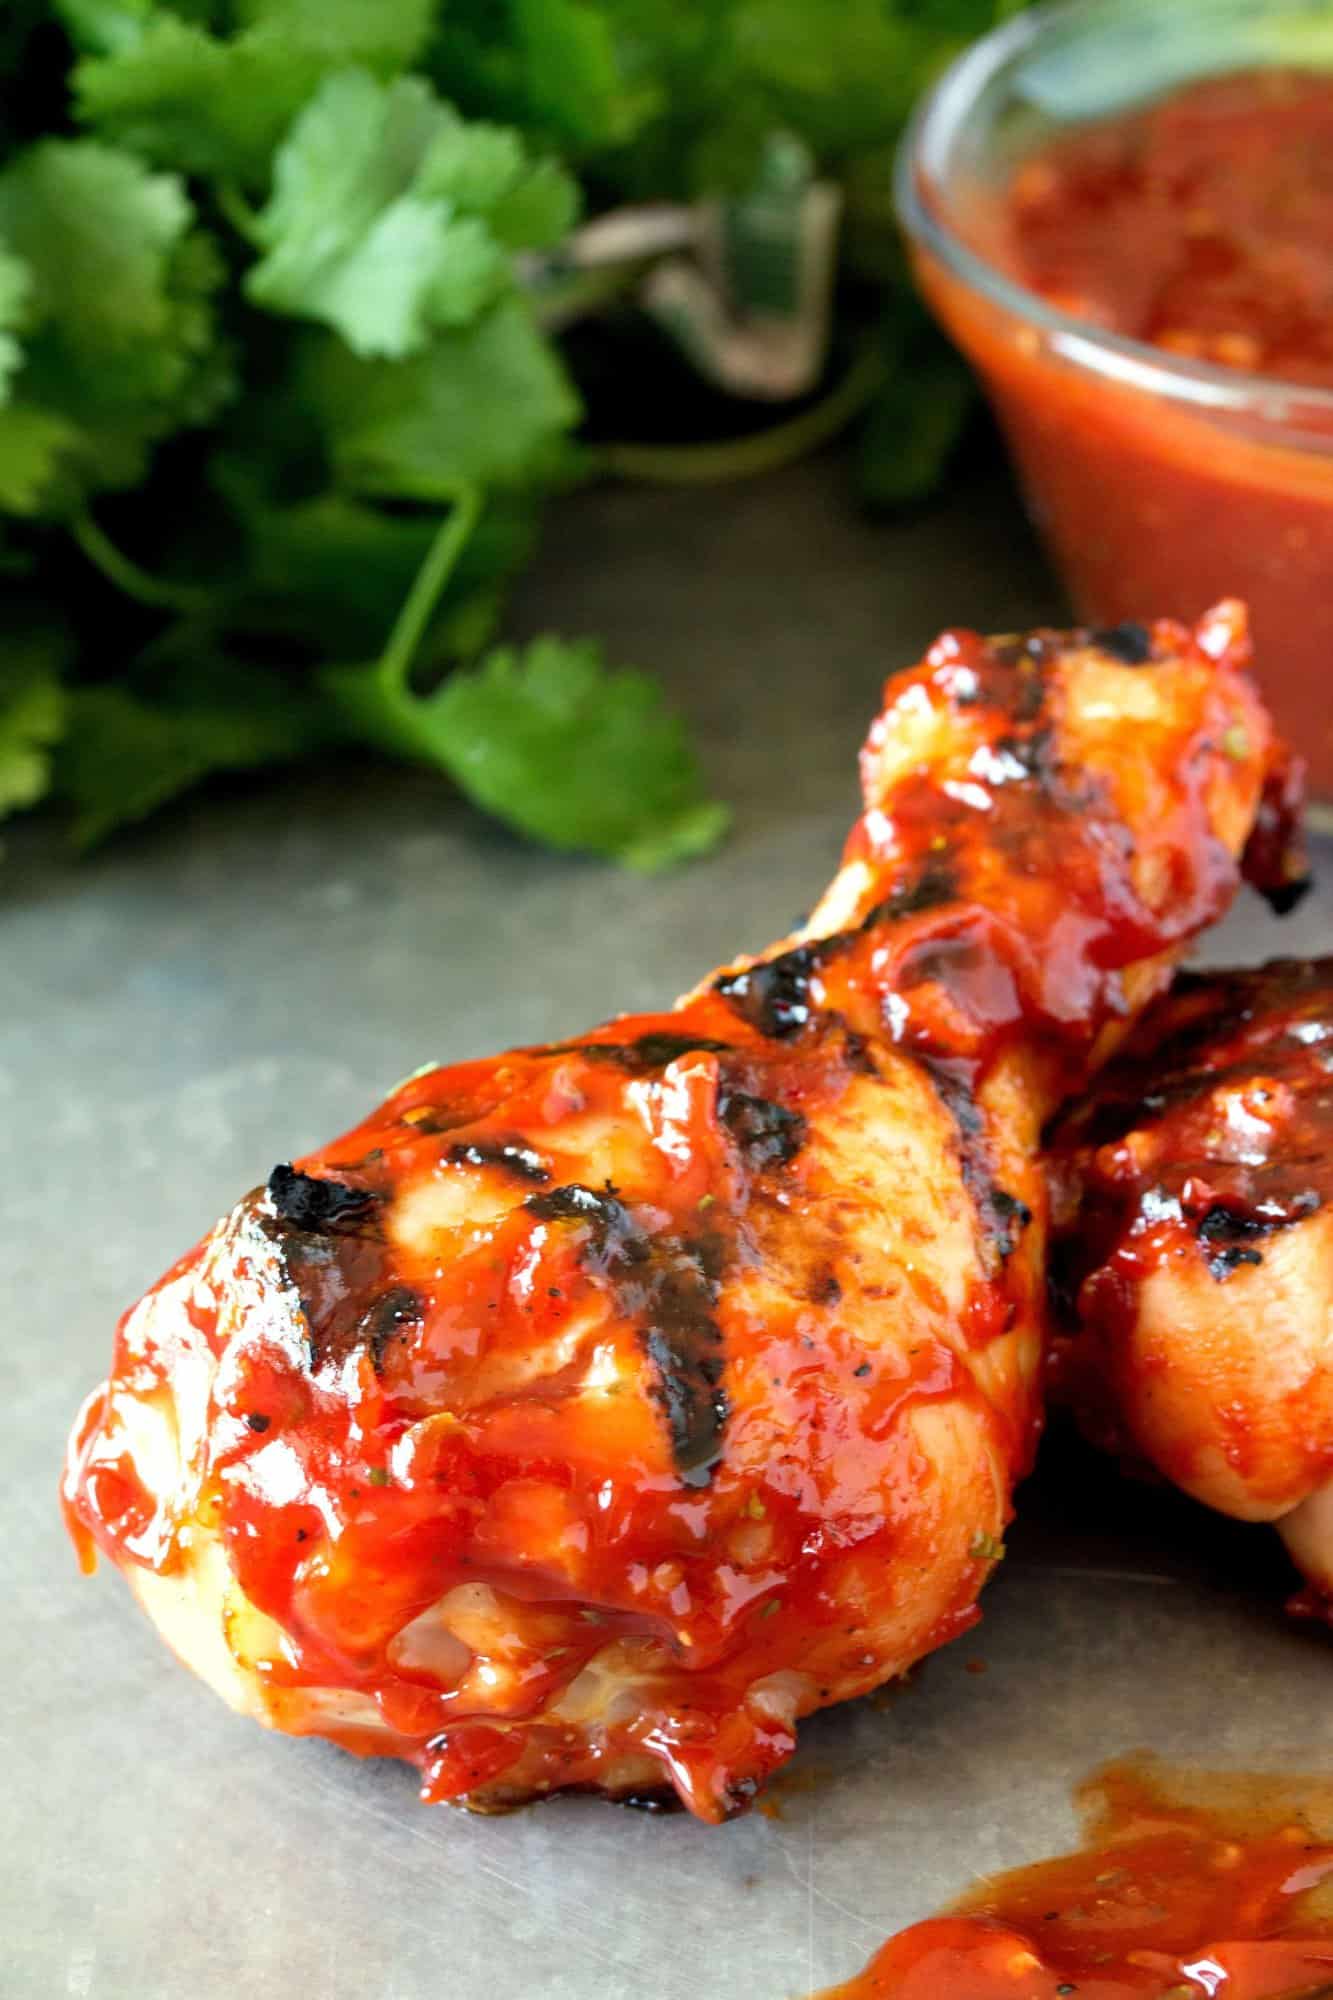  A homemade hickory smoked BBQ sauce is brushed over chicken drumsticks and grilled to perfection. These Hickory Smoked BBQ Chicken Drumsticks are a tasty backyard barbecue delight!